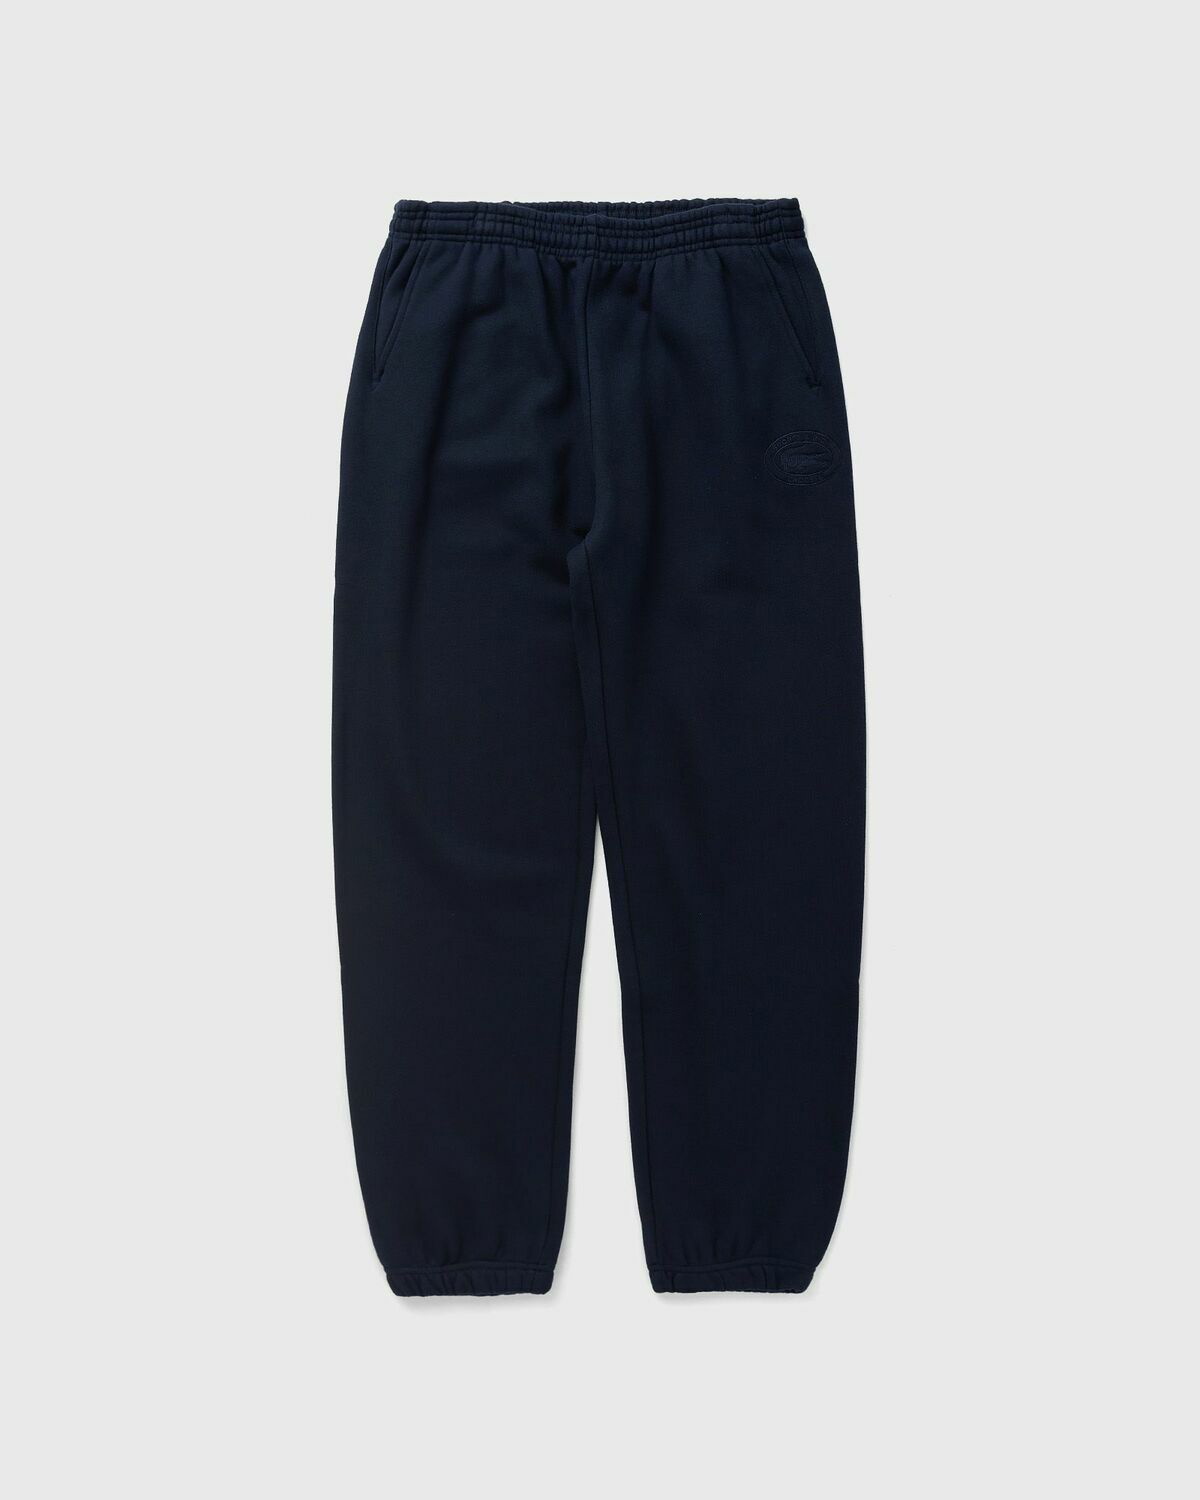 Sporty & Rich Lacoste Oval Logo Embroidered Sweatpant Blue - Mens